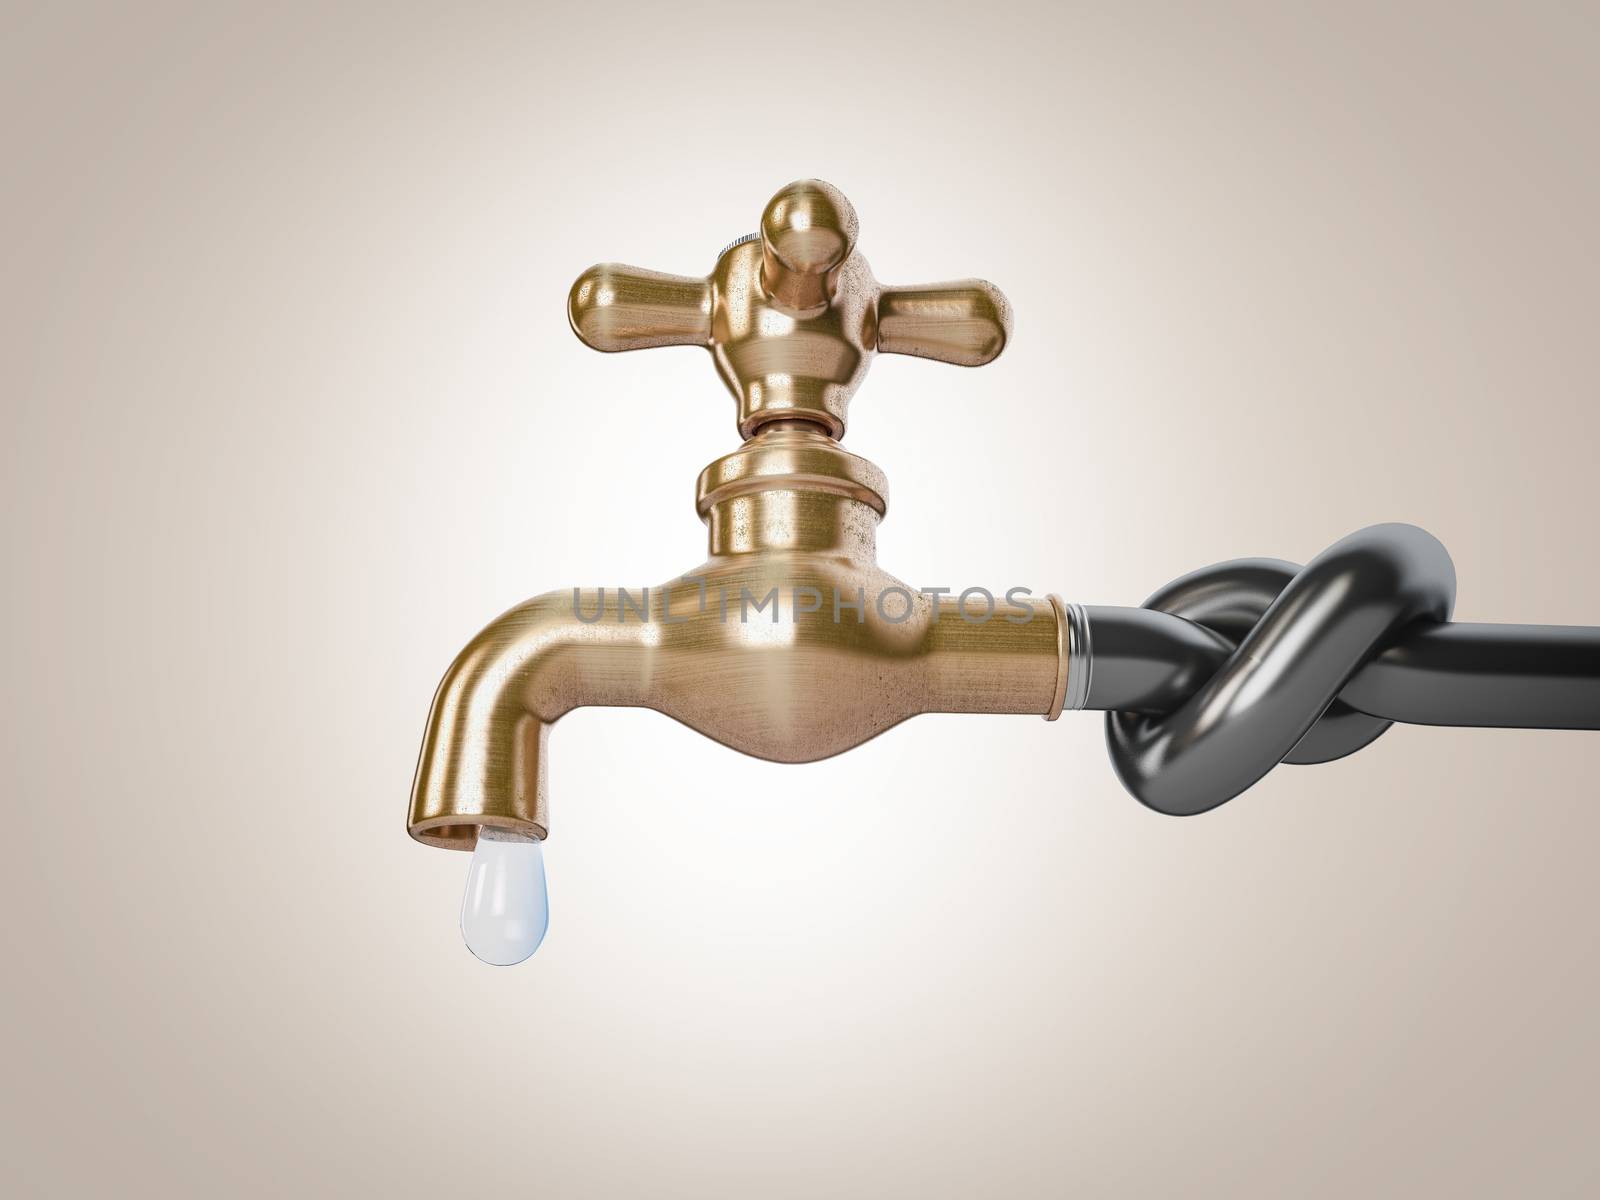 3d Rendering of Classic brass faucet sticking out from a blocked pipe, clipping path included by tussik